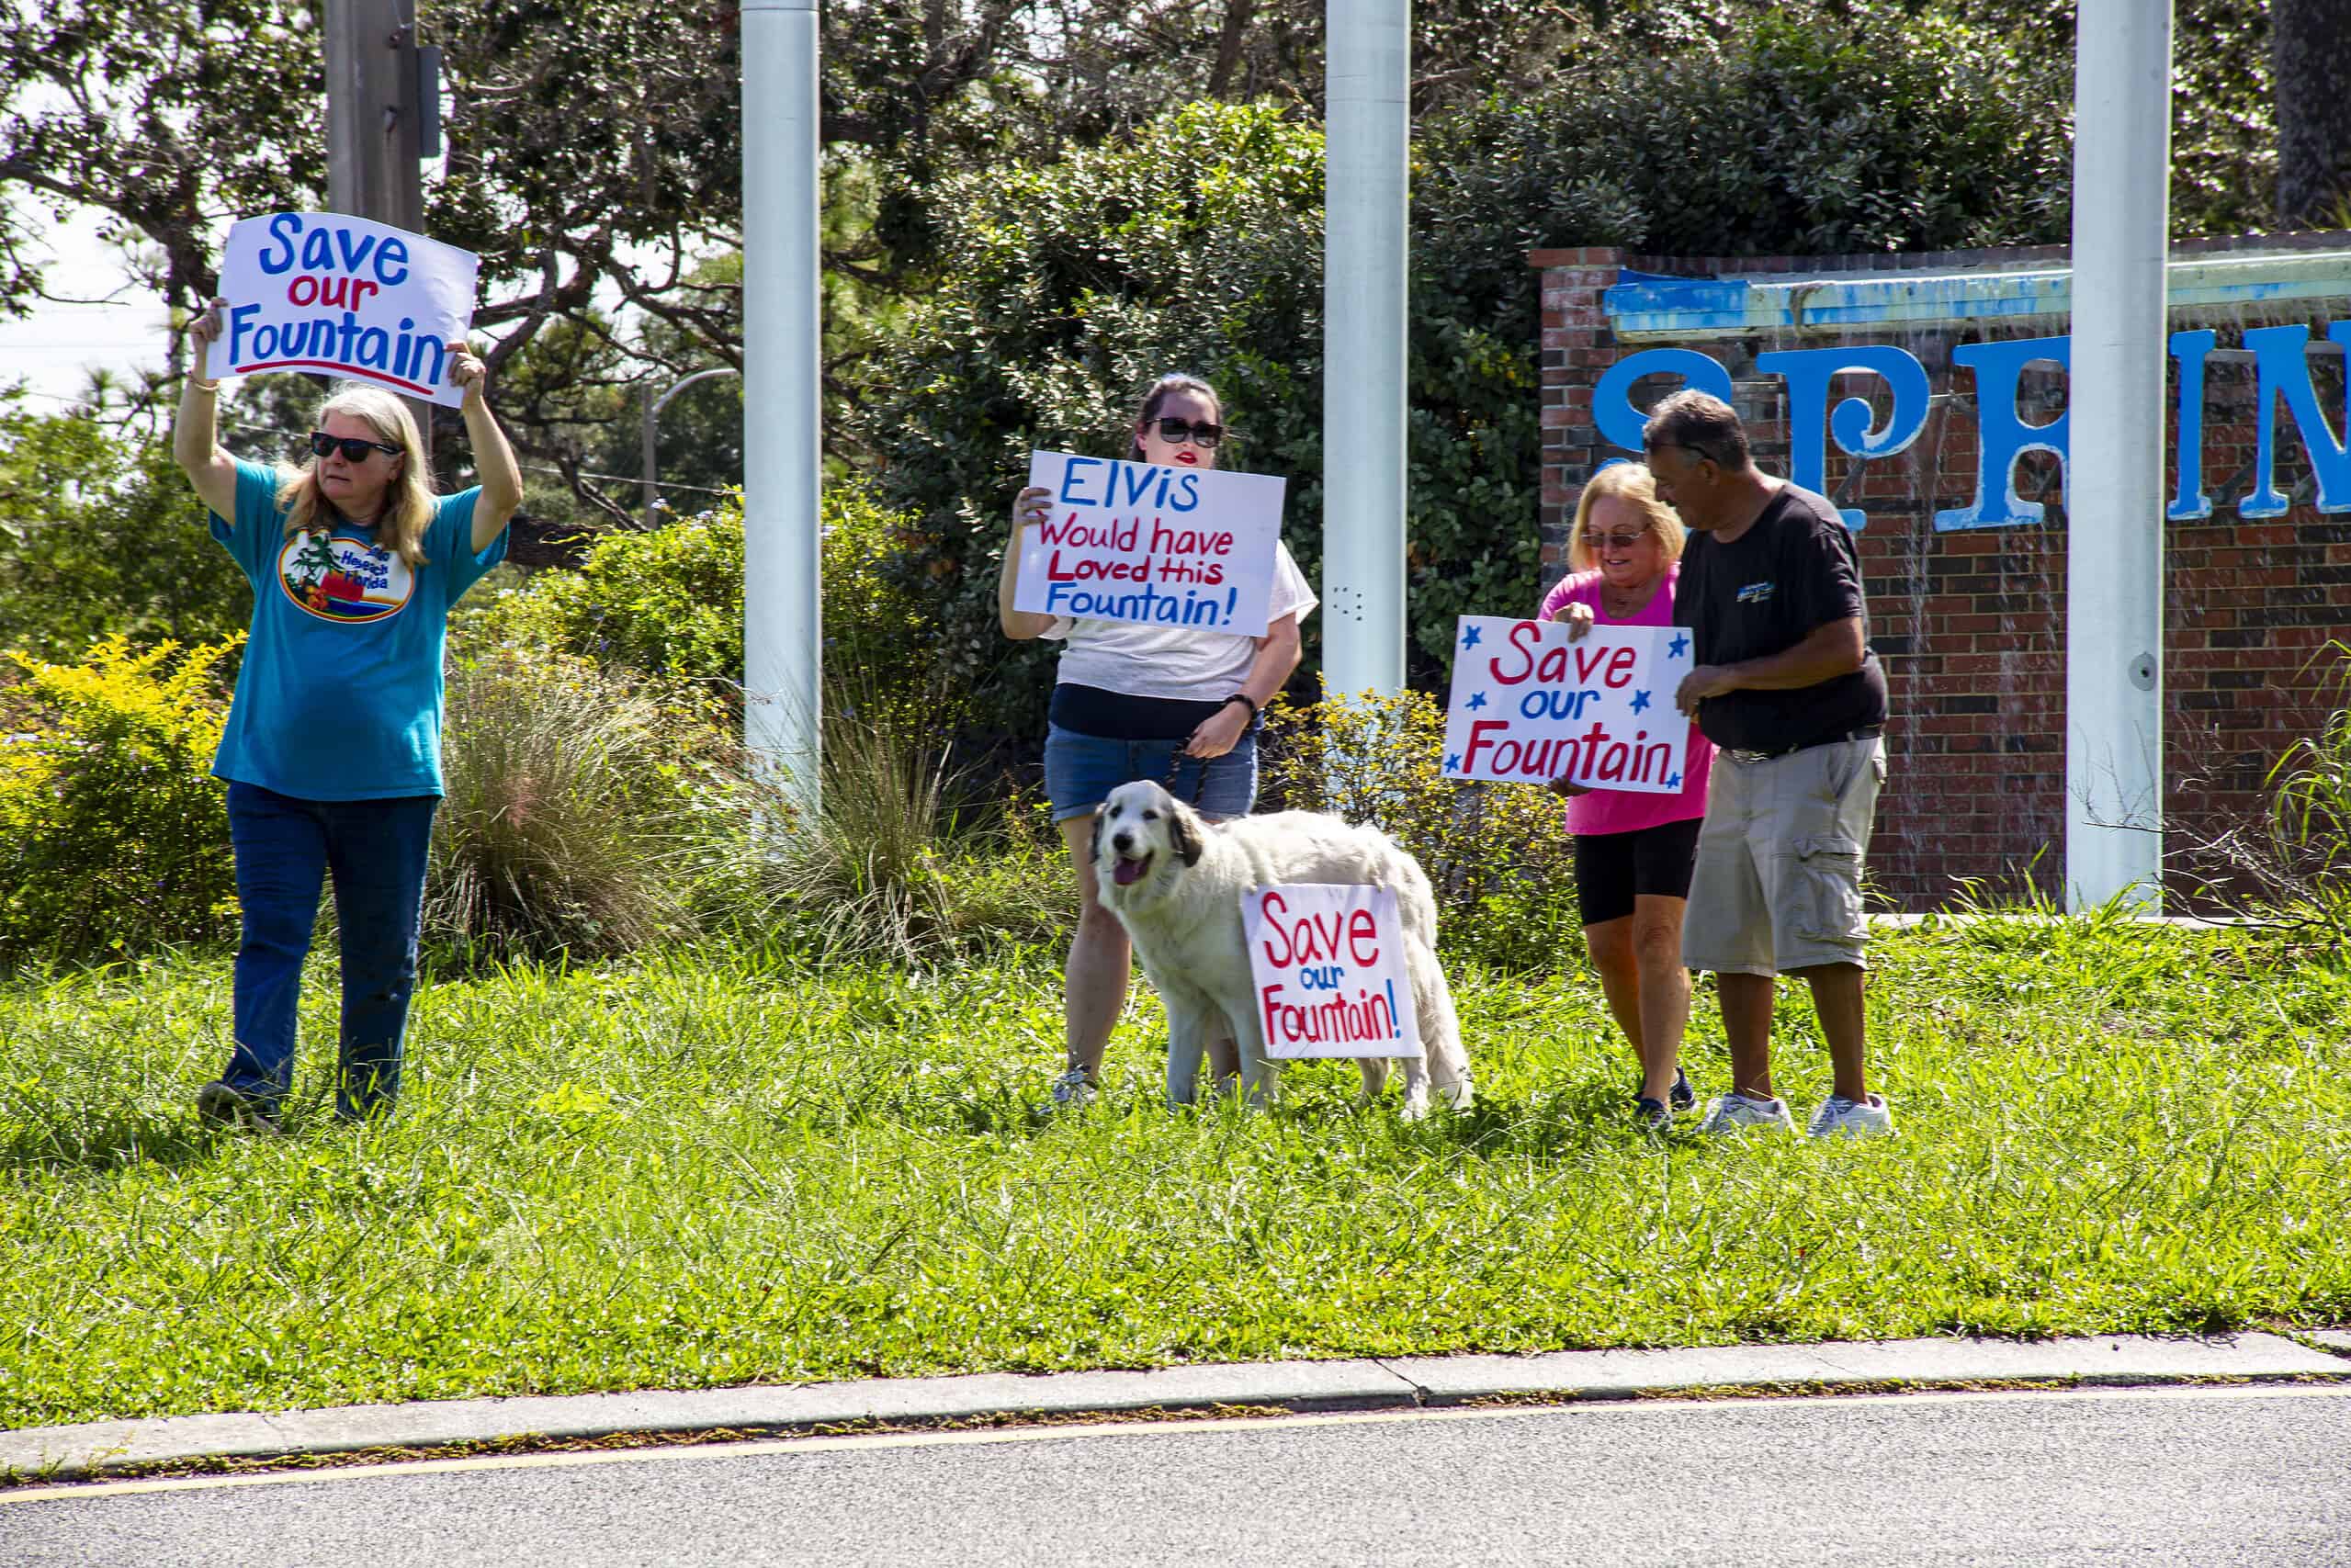 Residents show their support for preserving the Spring Hill Waterfall on Saturday, June 22. [Photo by Julie Maglio]
